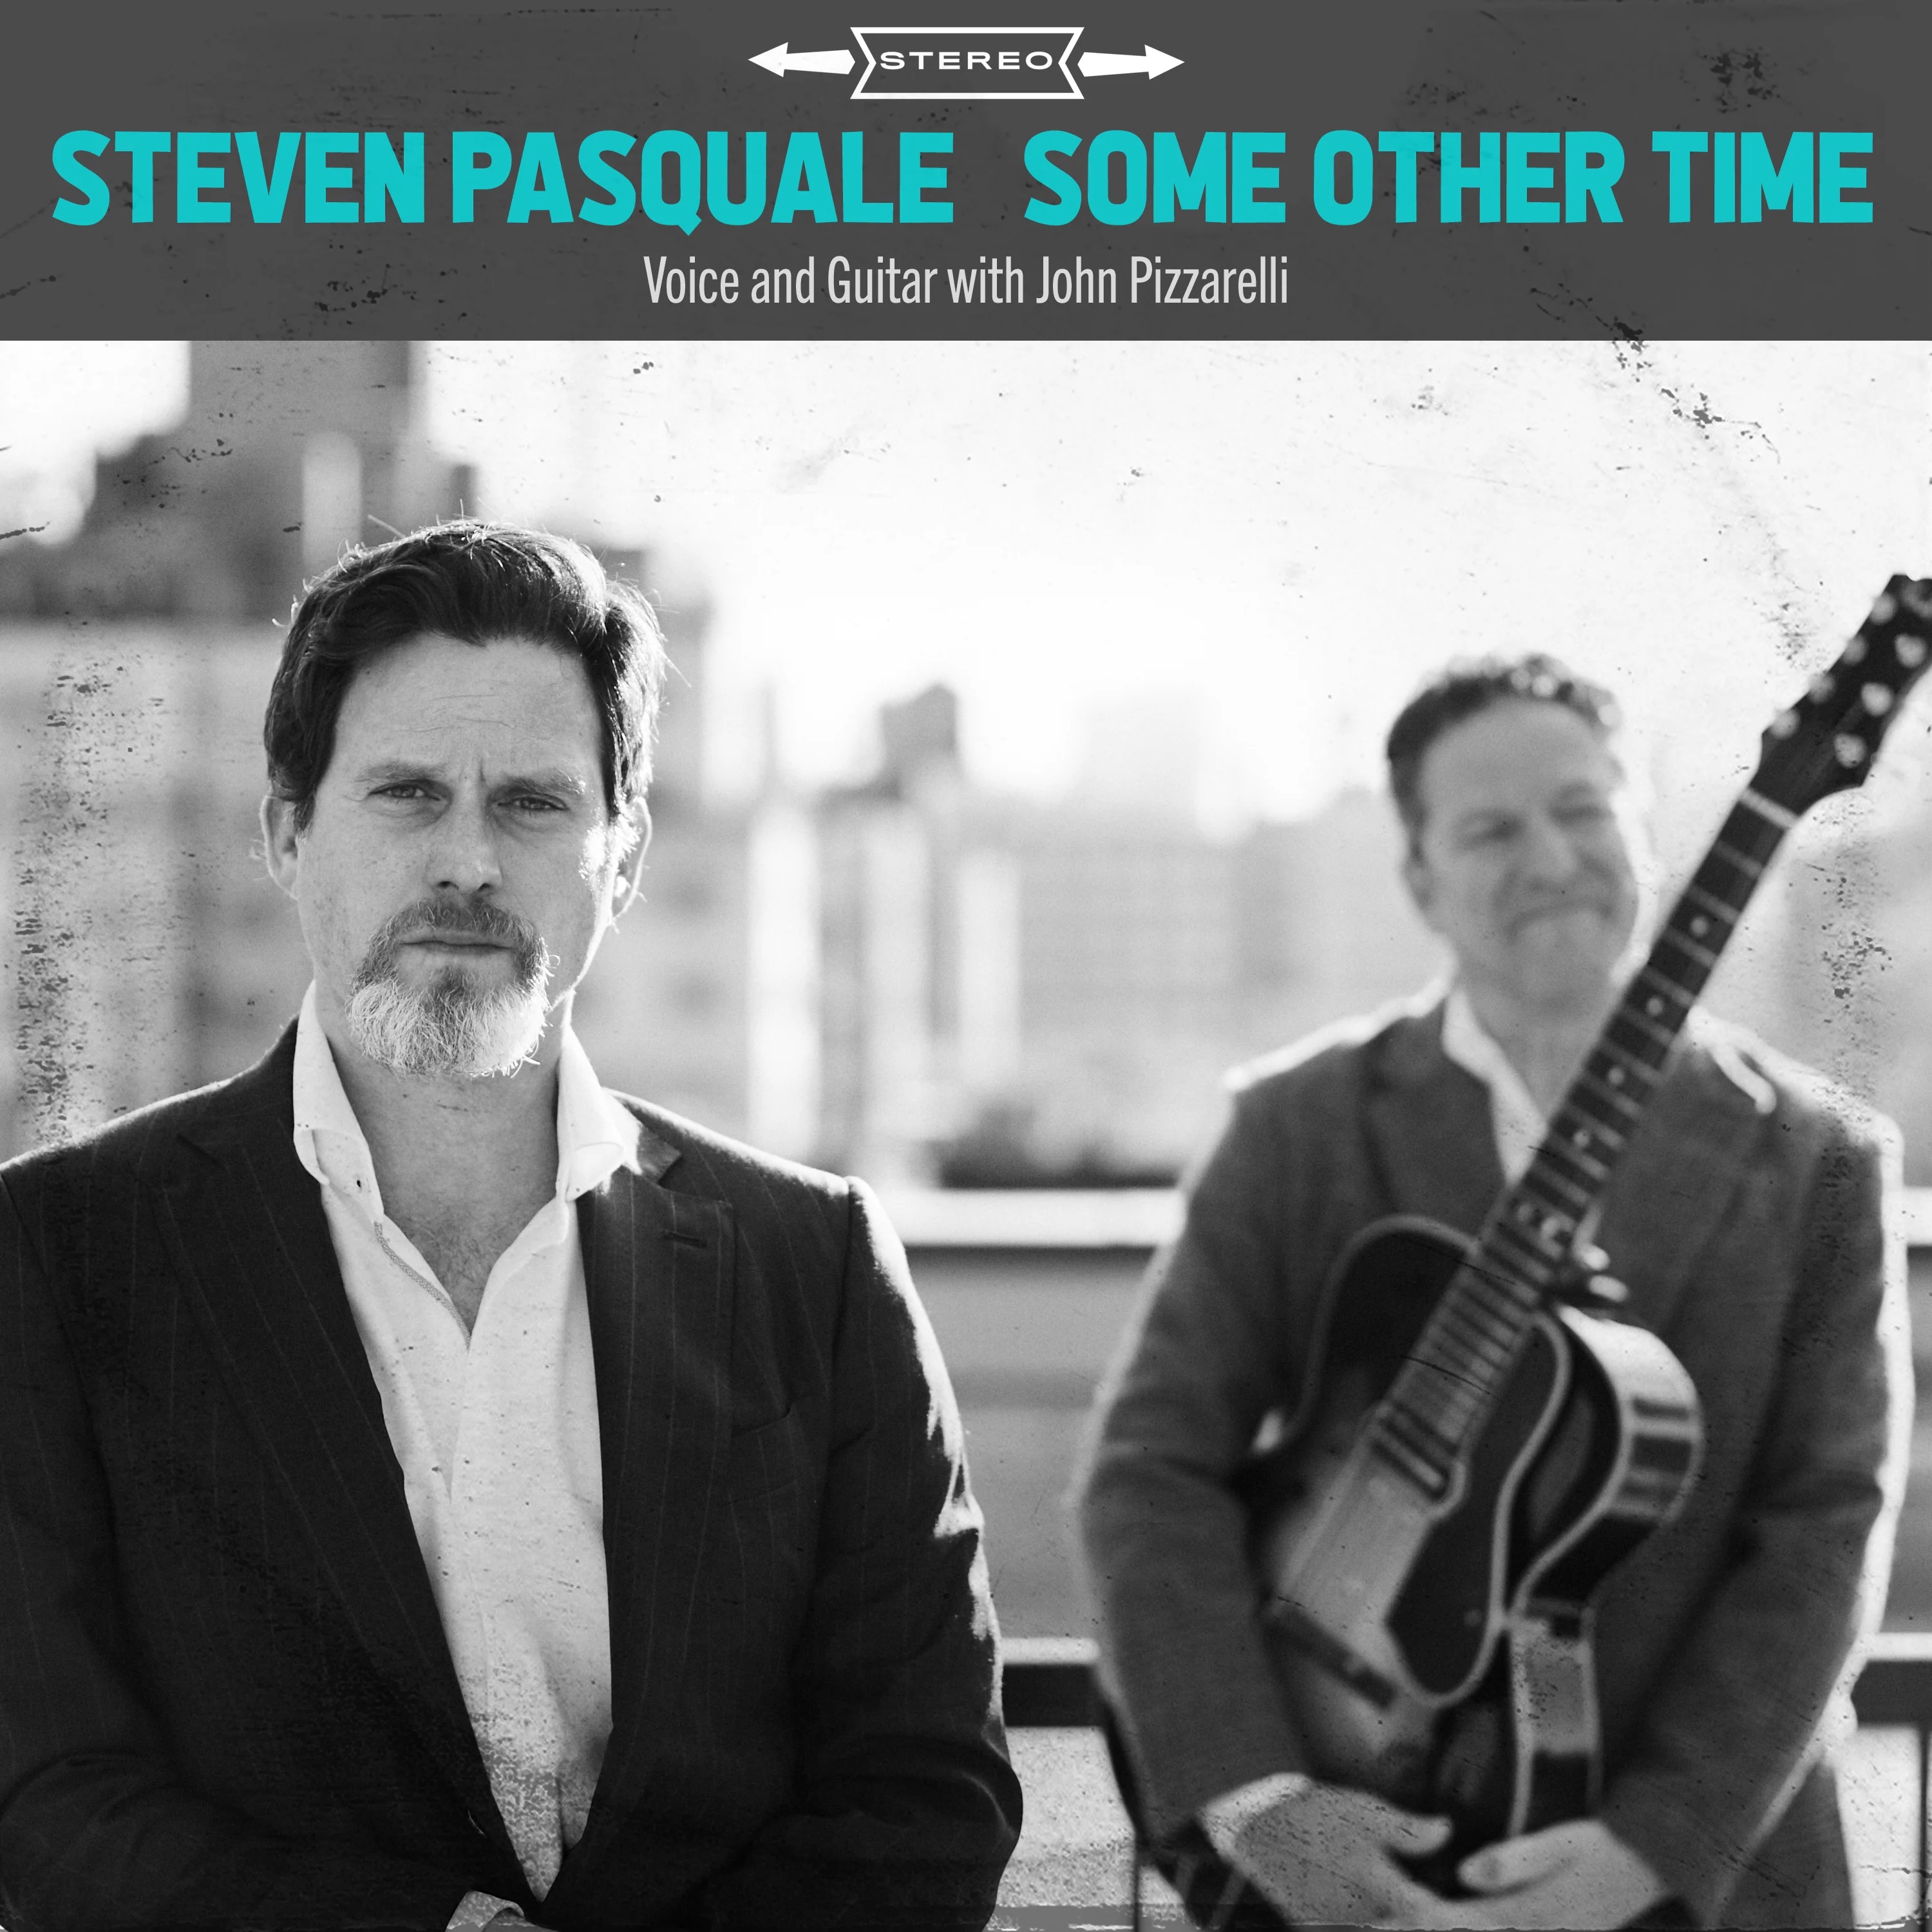 Steven Pasquale: Some Other Time Album